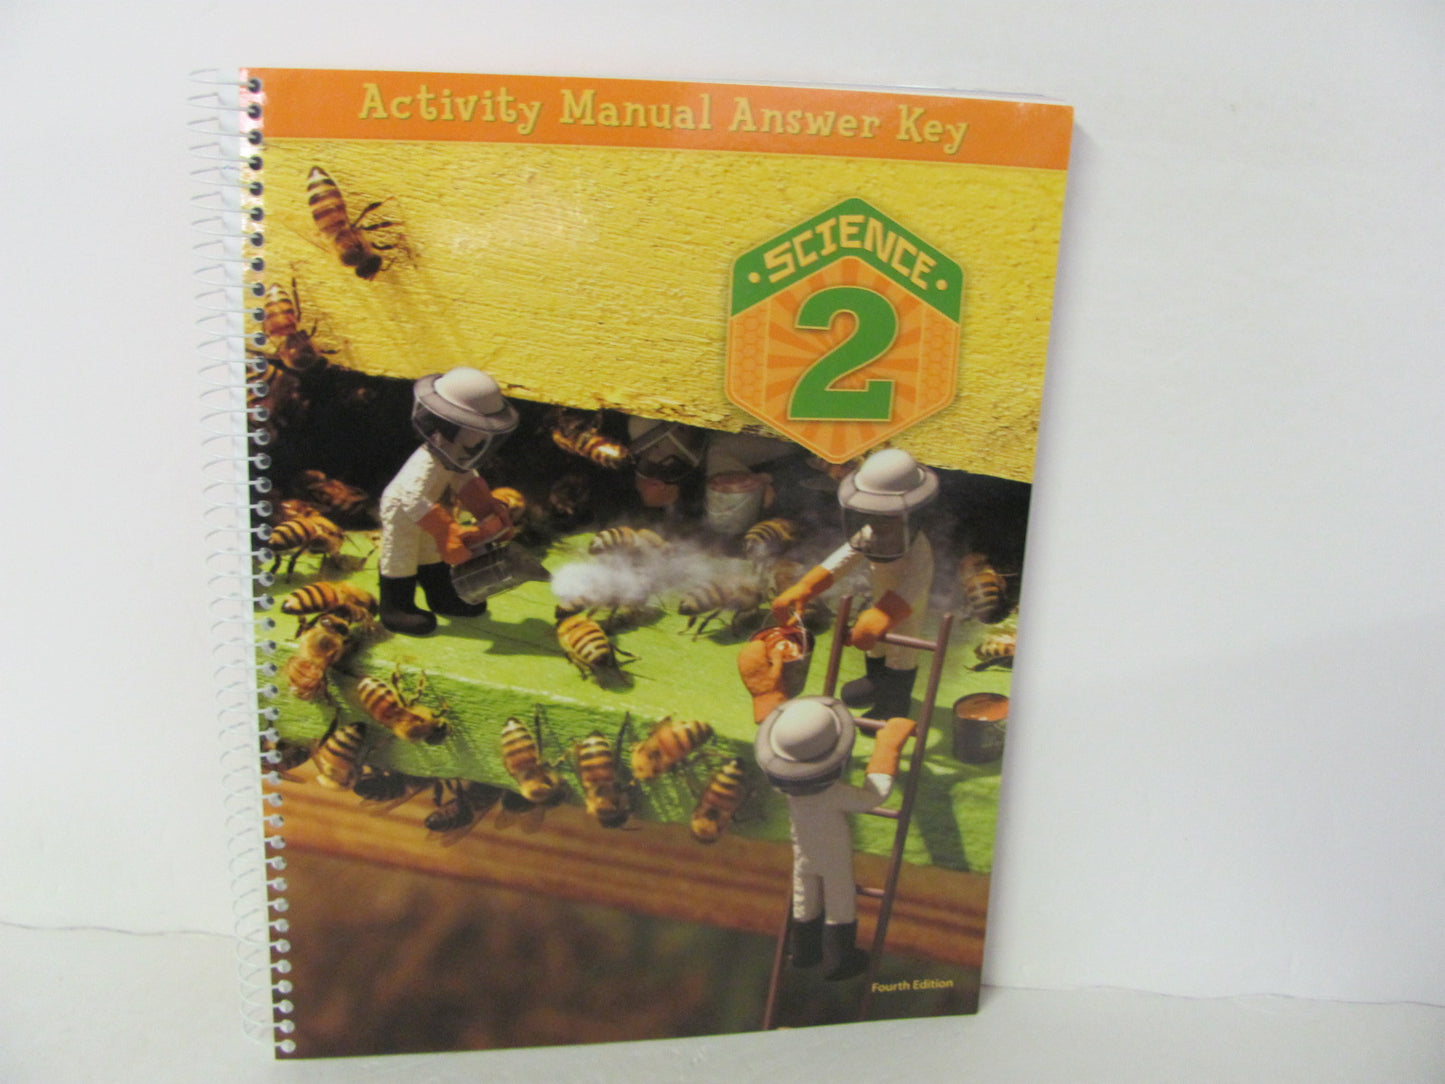 Science 2 BJU Press Activity Key Pre-Owned 2nd Grade Science Textbooks